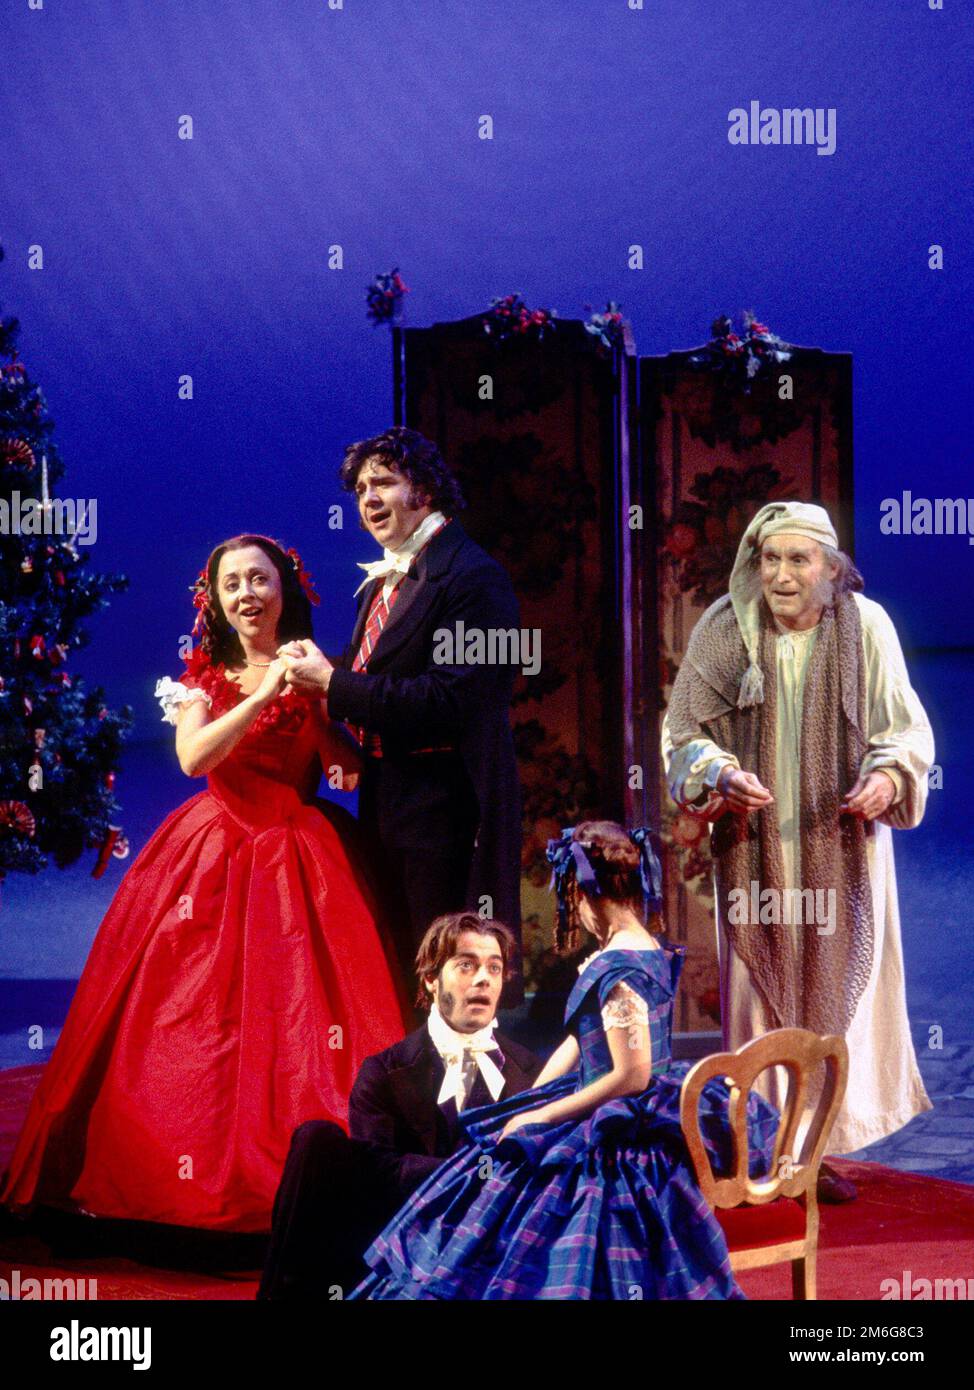 rear, l-r: Sara Weymouth (Fred's wife), Philip Quast (Fred), Clive Francis (Ebenezer Scrooge) in A CHRISTMAS CAROL by Charles Dickens at the Royal Shakespeare Company (RSC), Barbican Theatre, Barbican Centre, London EC2  28/11/1994   adapted by John Mortimer  music: Nigel Hess  set design: John Gunter  costumes: Deirdre Clancy  lighting: Nigel Levings  choreography: Lindsay Dolan  director: Ian Judge Stock Photo